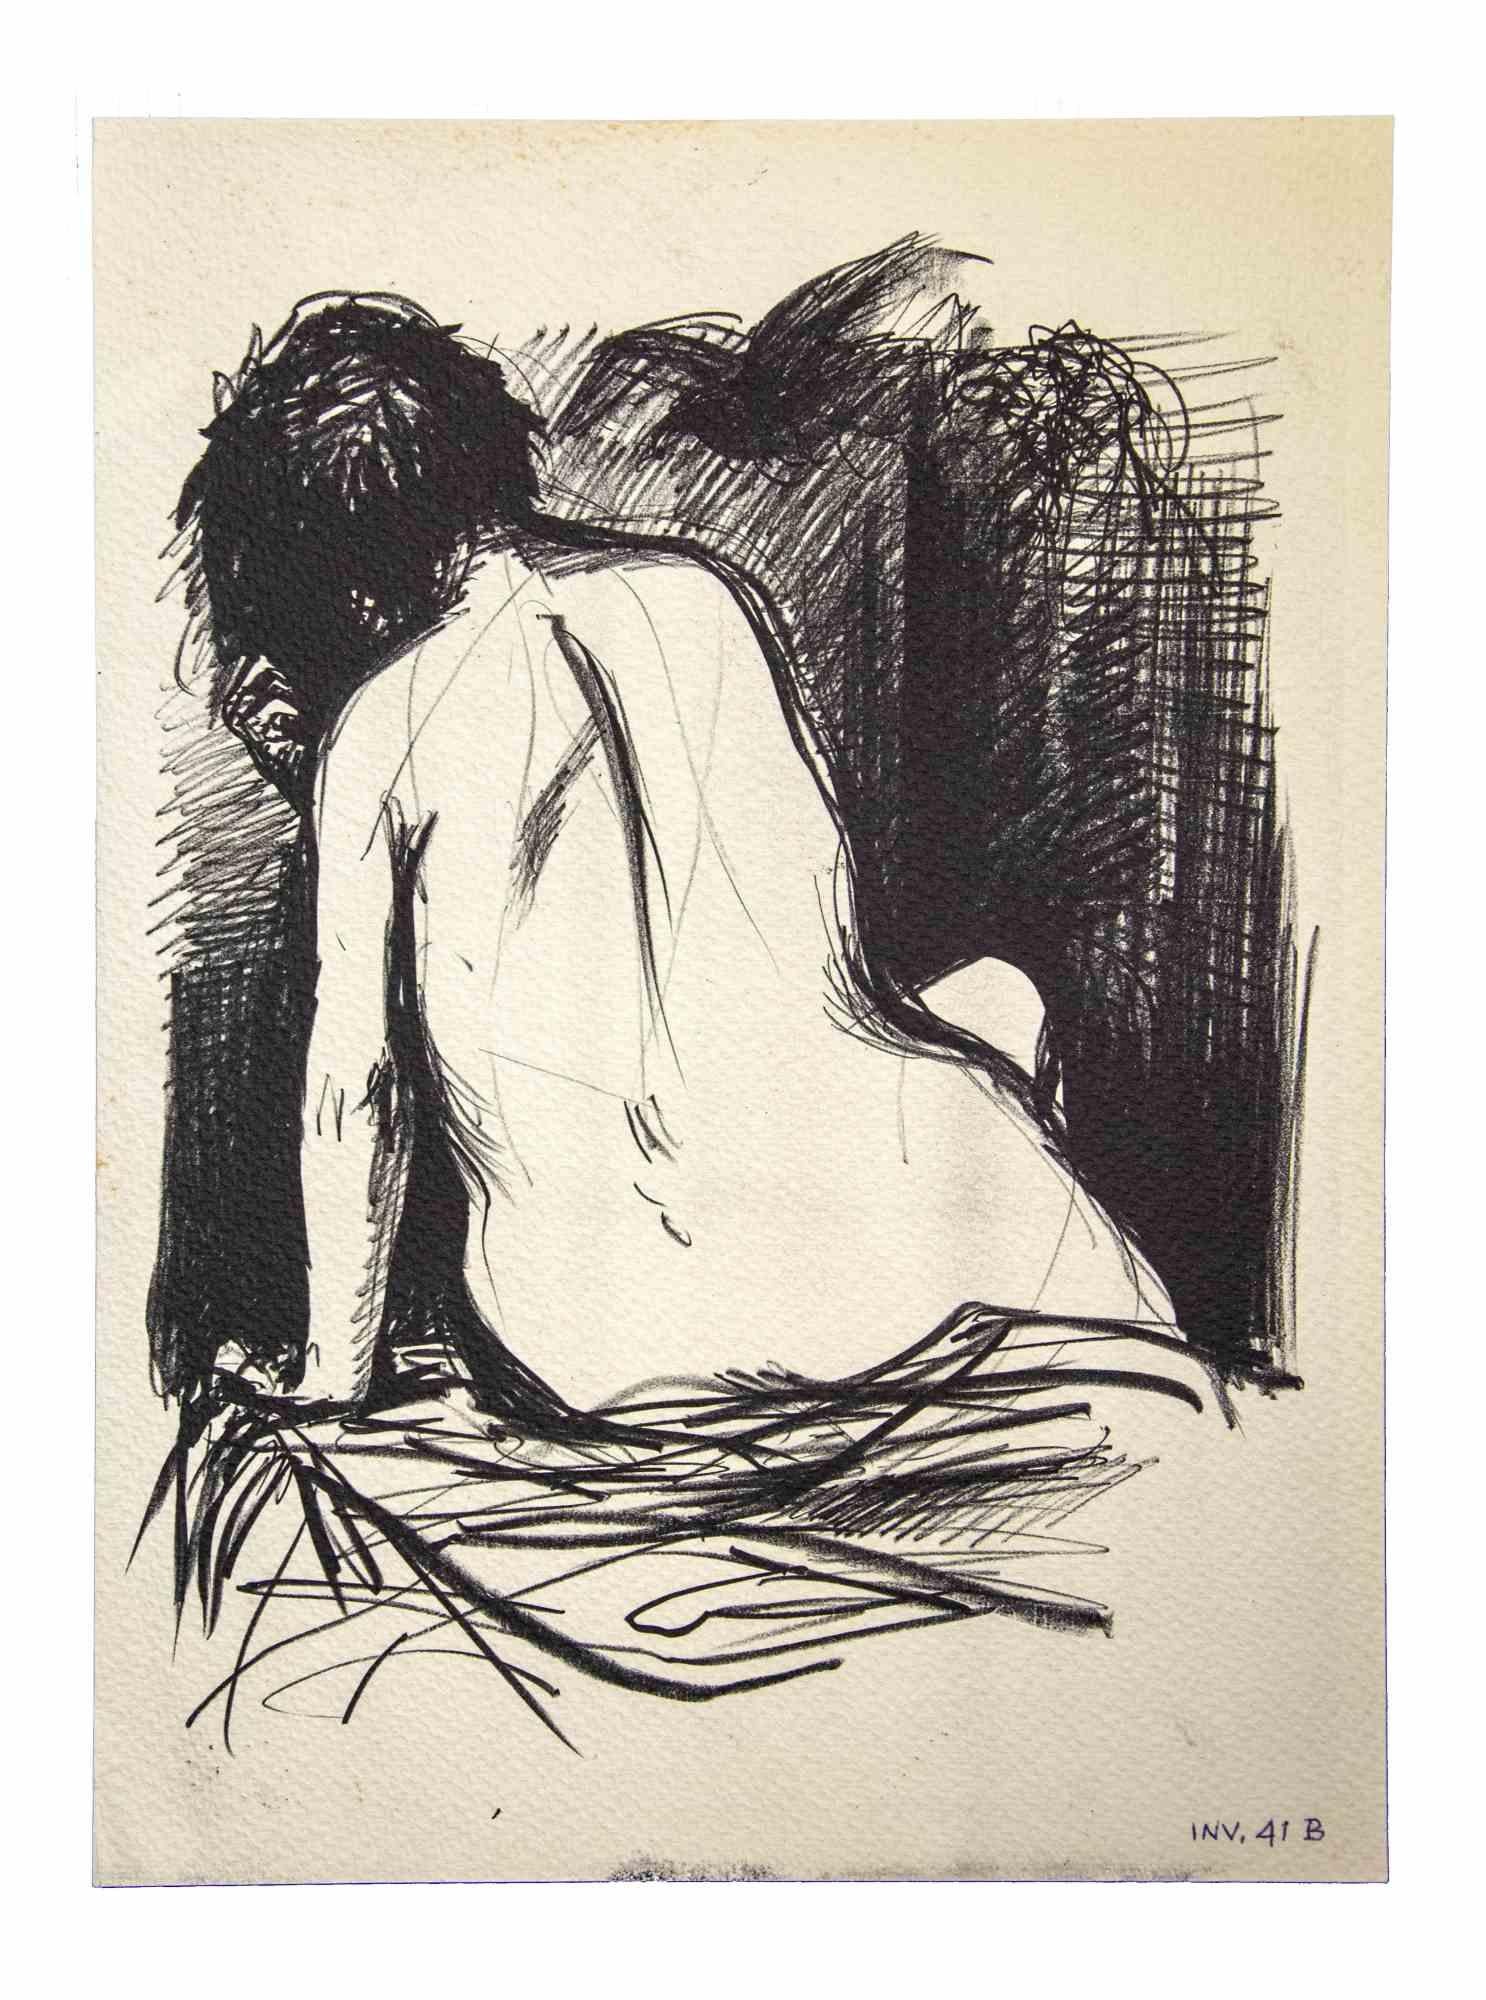 Nude from the back is an original artwork realized in the 1980s by the Italian Contemporary artist  Leo Guida  (1992 - 2017).

Original black marker on cardboard.

Good conditions.

Leo Guida  (1992 - 2017). Sensitive to current issues, artistic